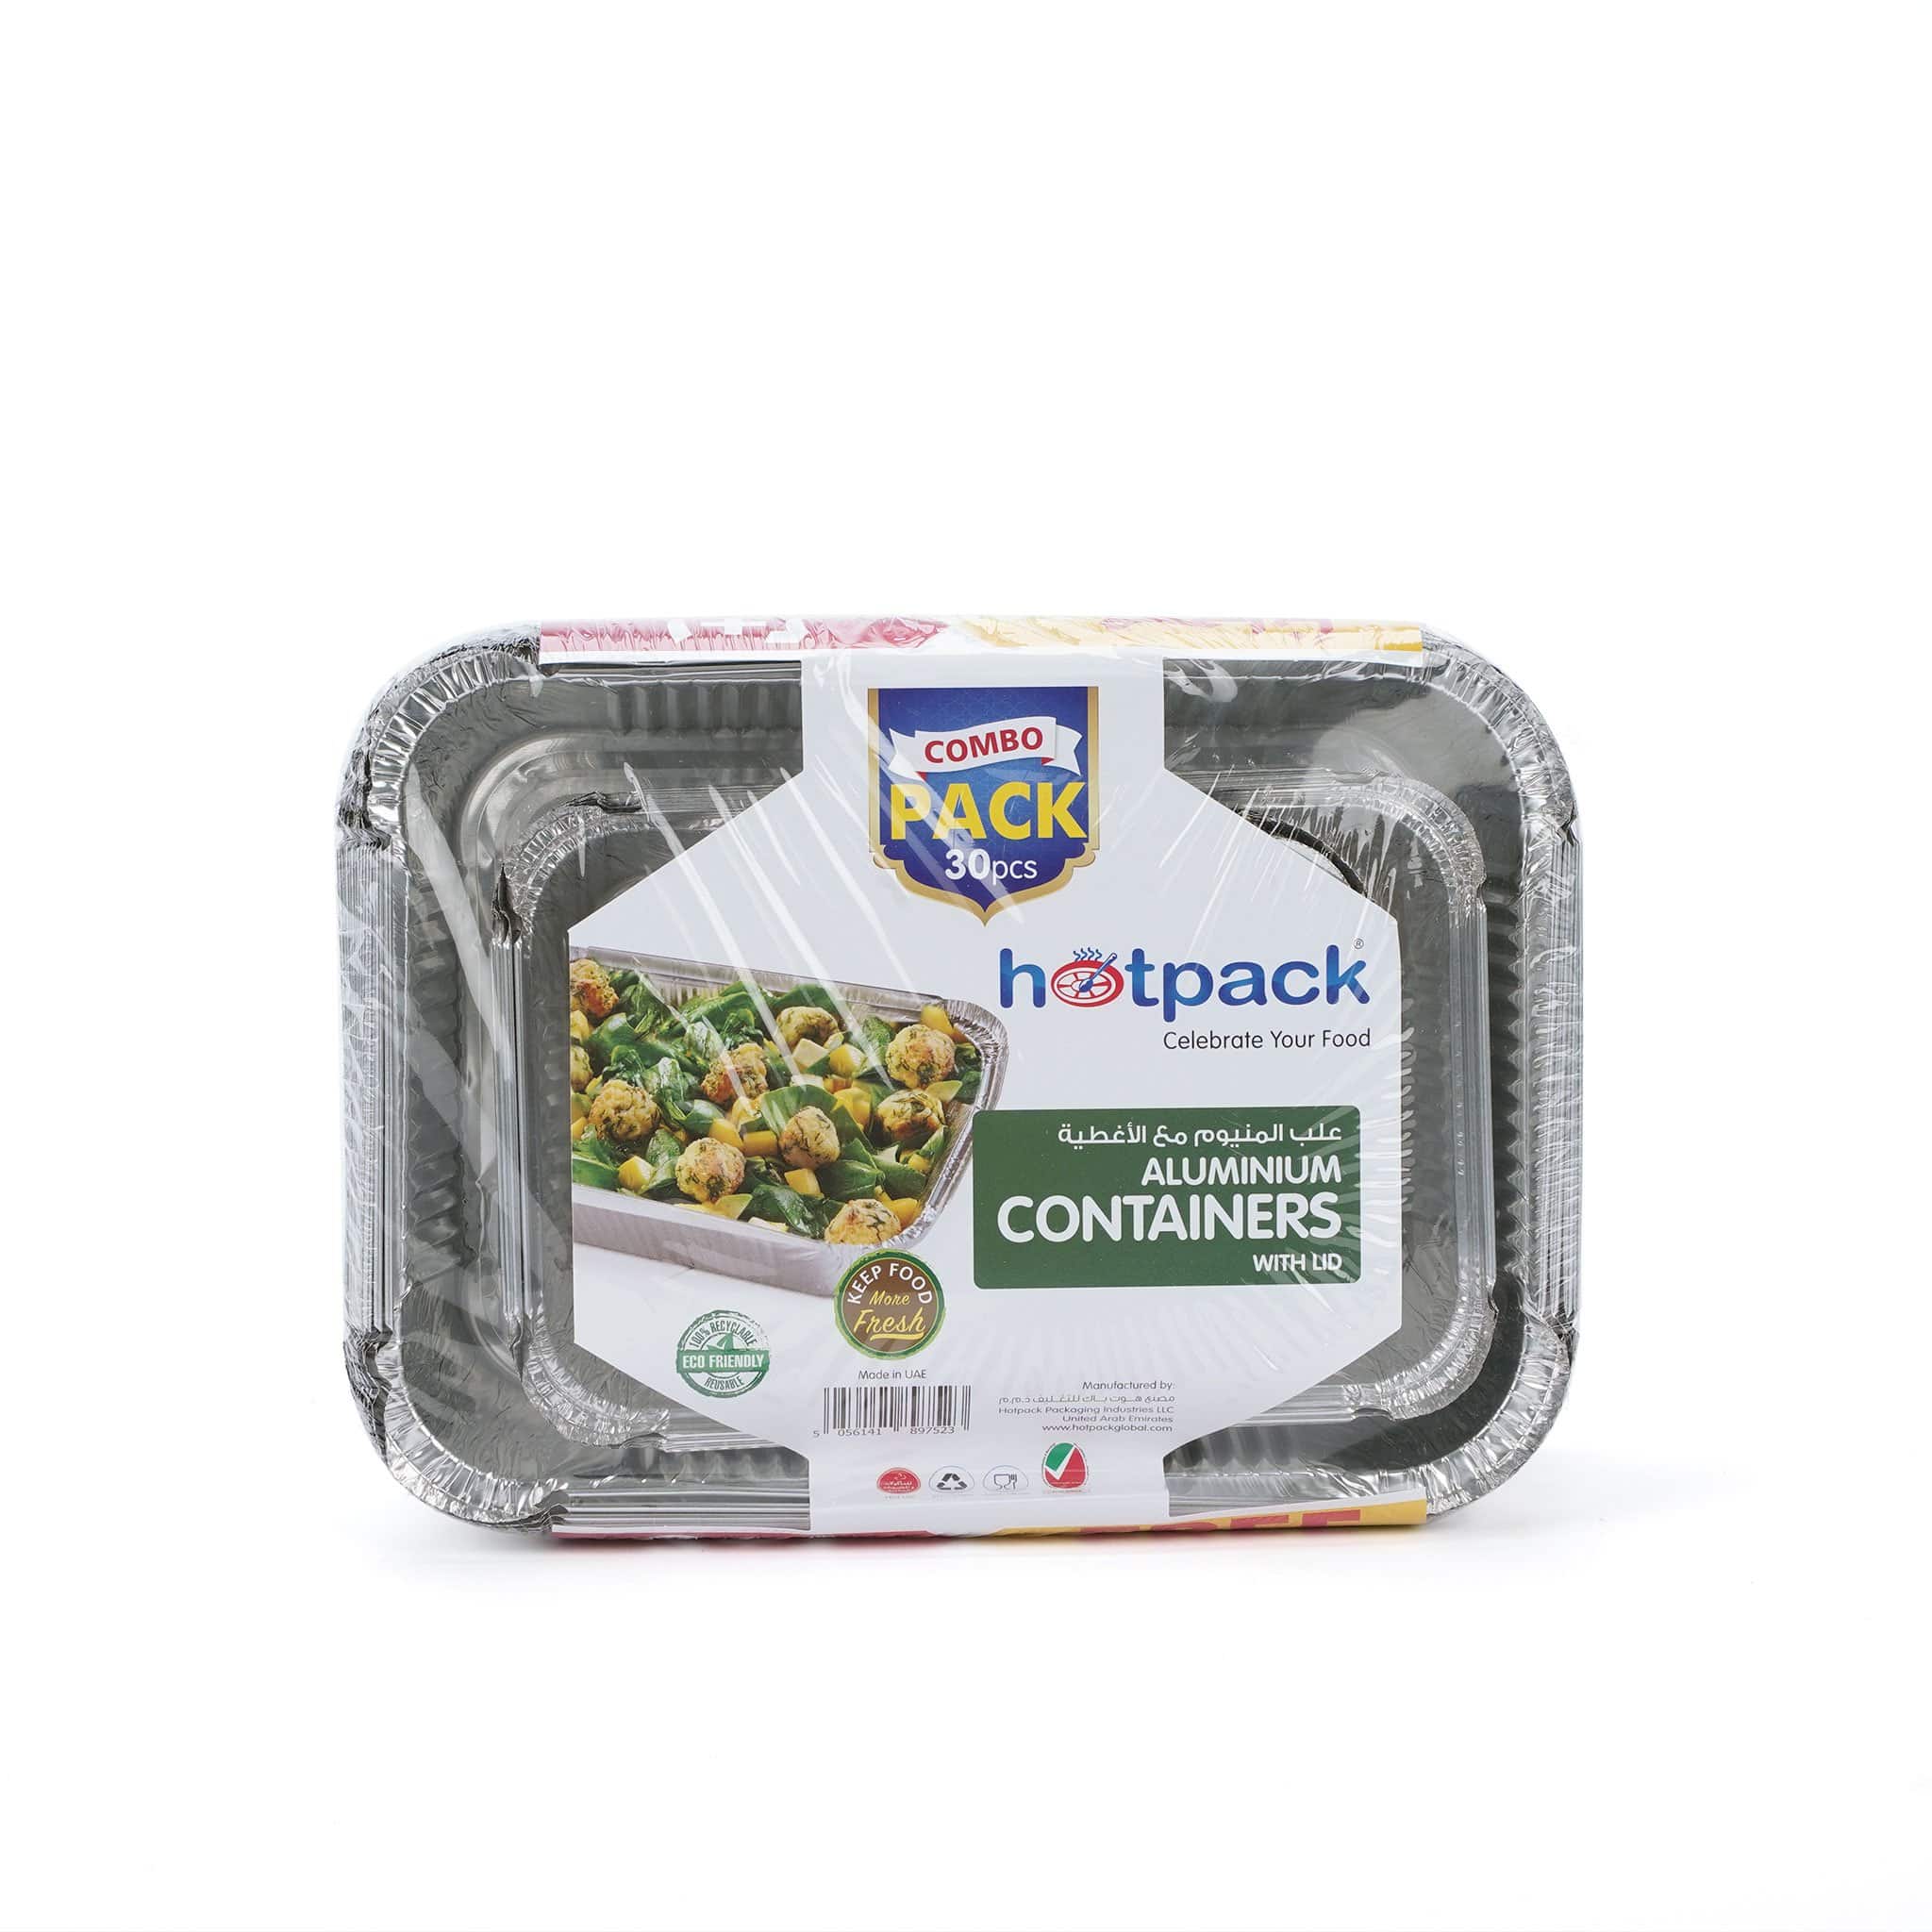 Hotpack Aluminum Container Combo Buy 2 Get 1 Free - Hotpack Oman